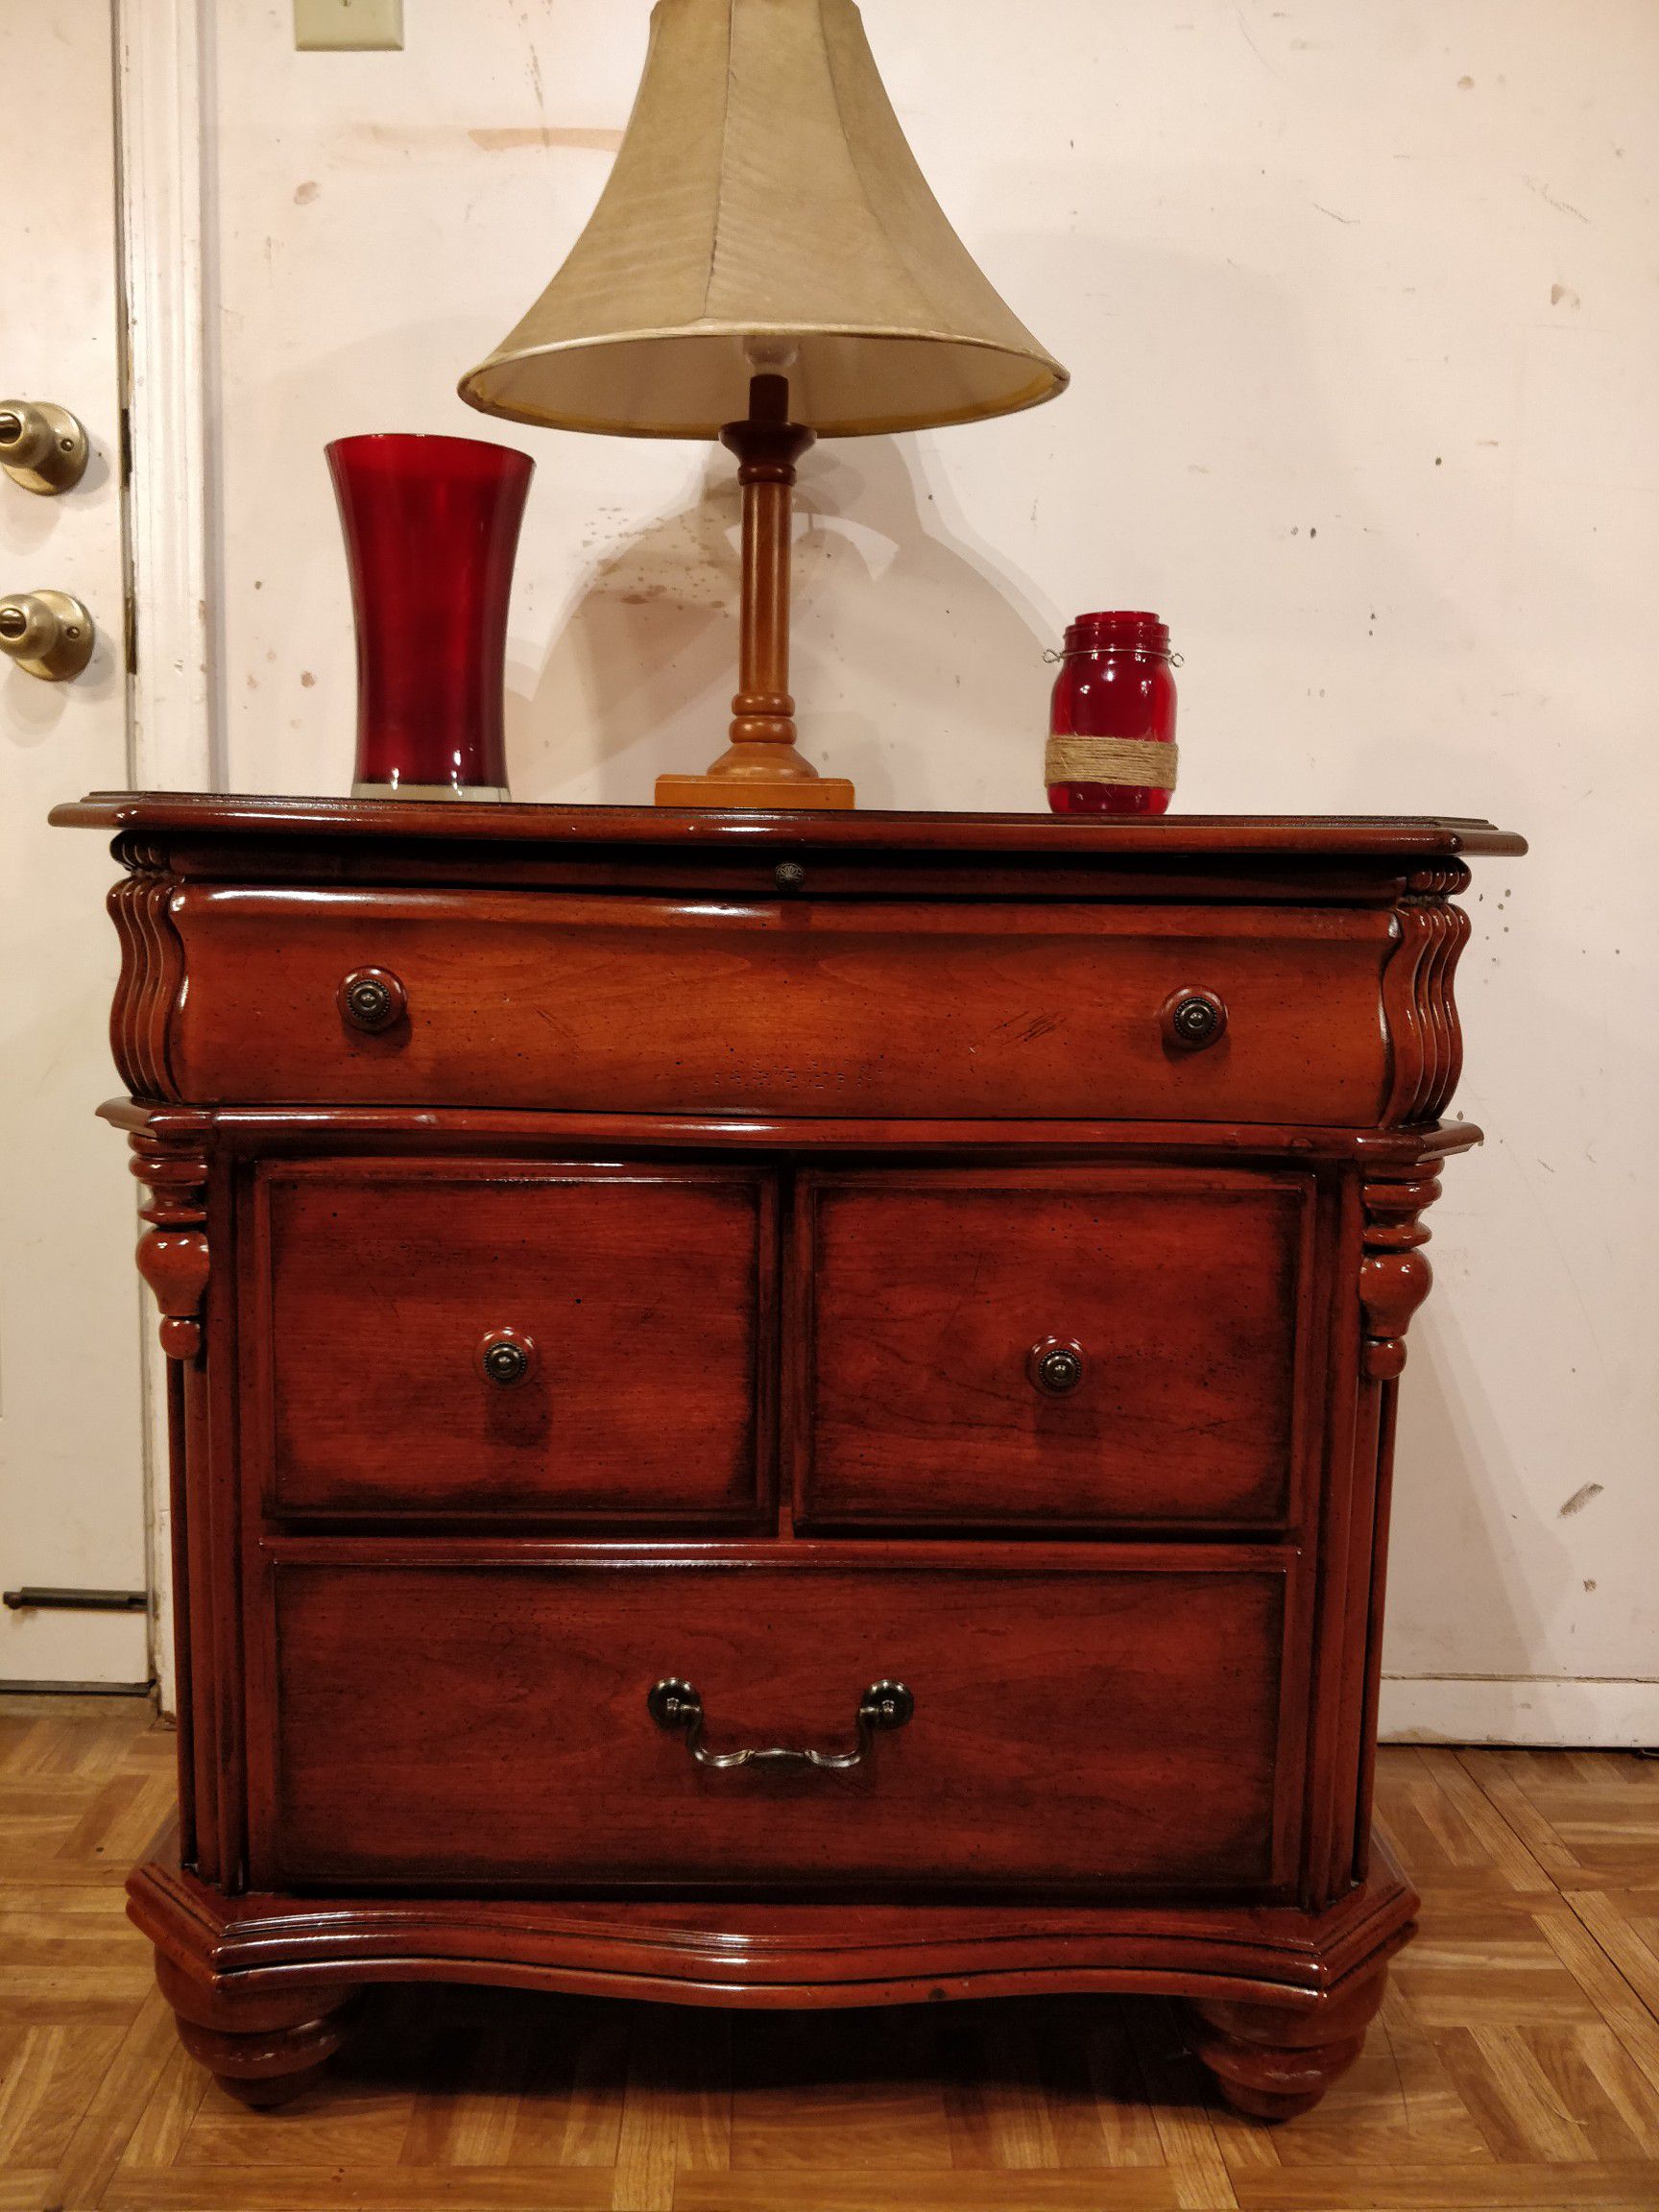 Like new solid wood AMERICAN SIGNATURE table/ dresser with 4 drawers, shelf and adjustable legs in great condition, all drawers sliding smoothly,